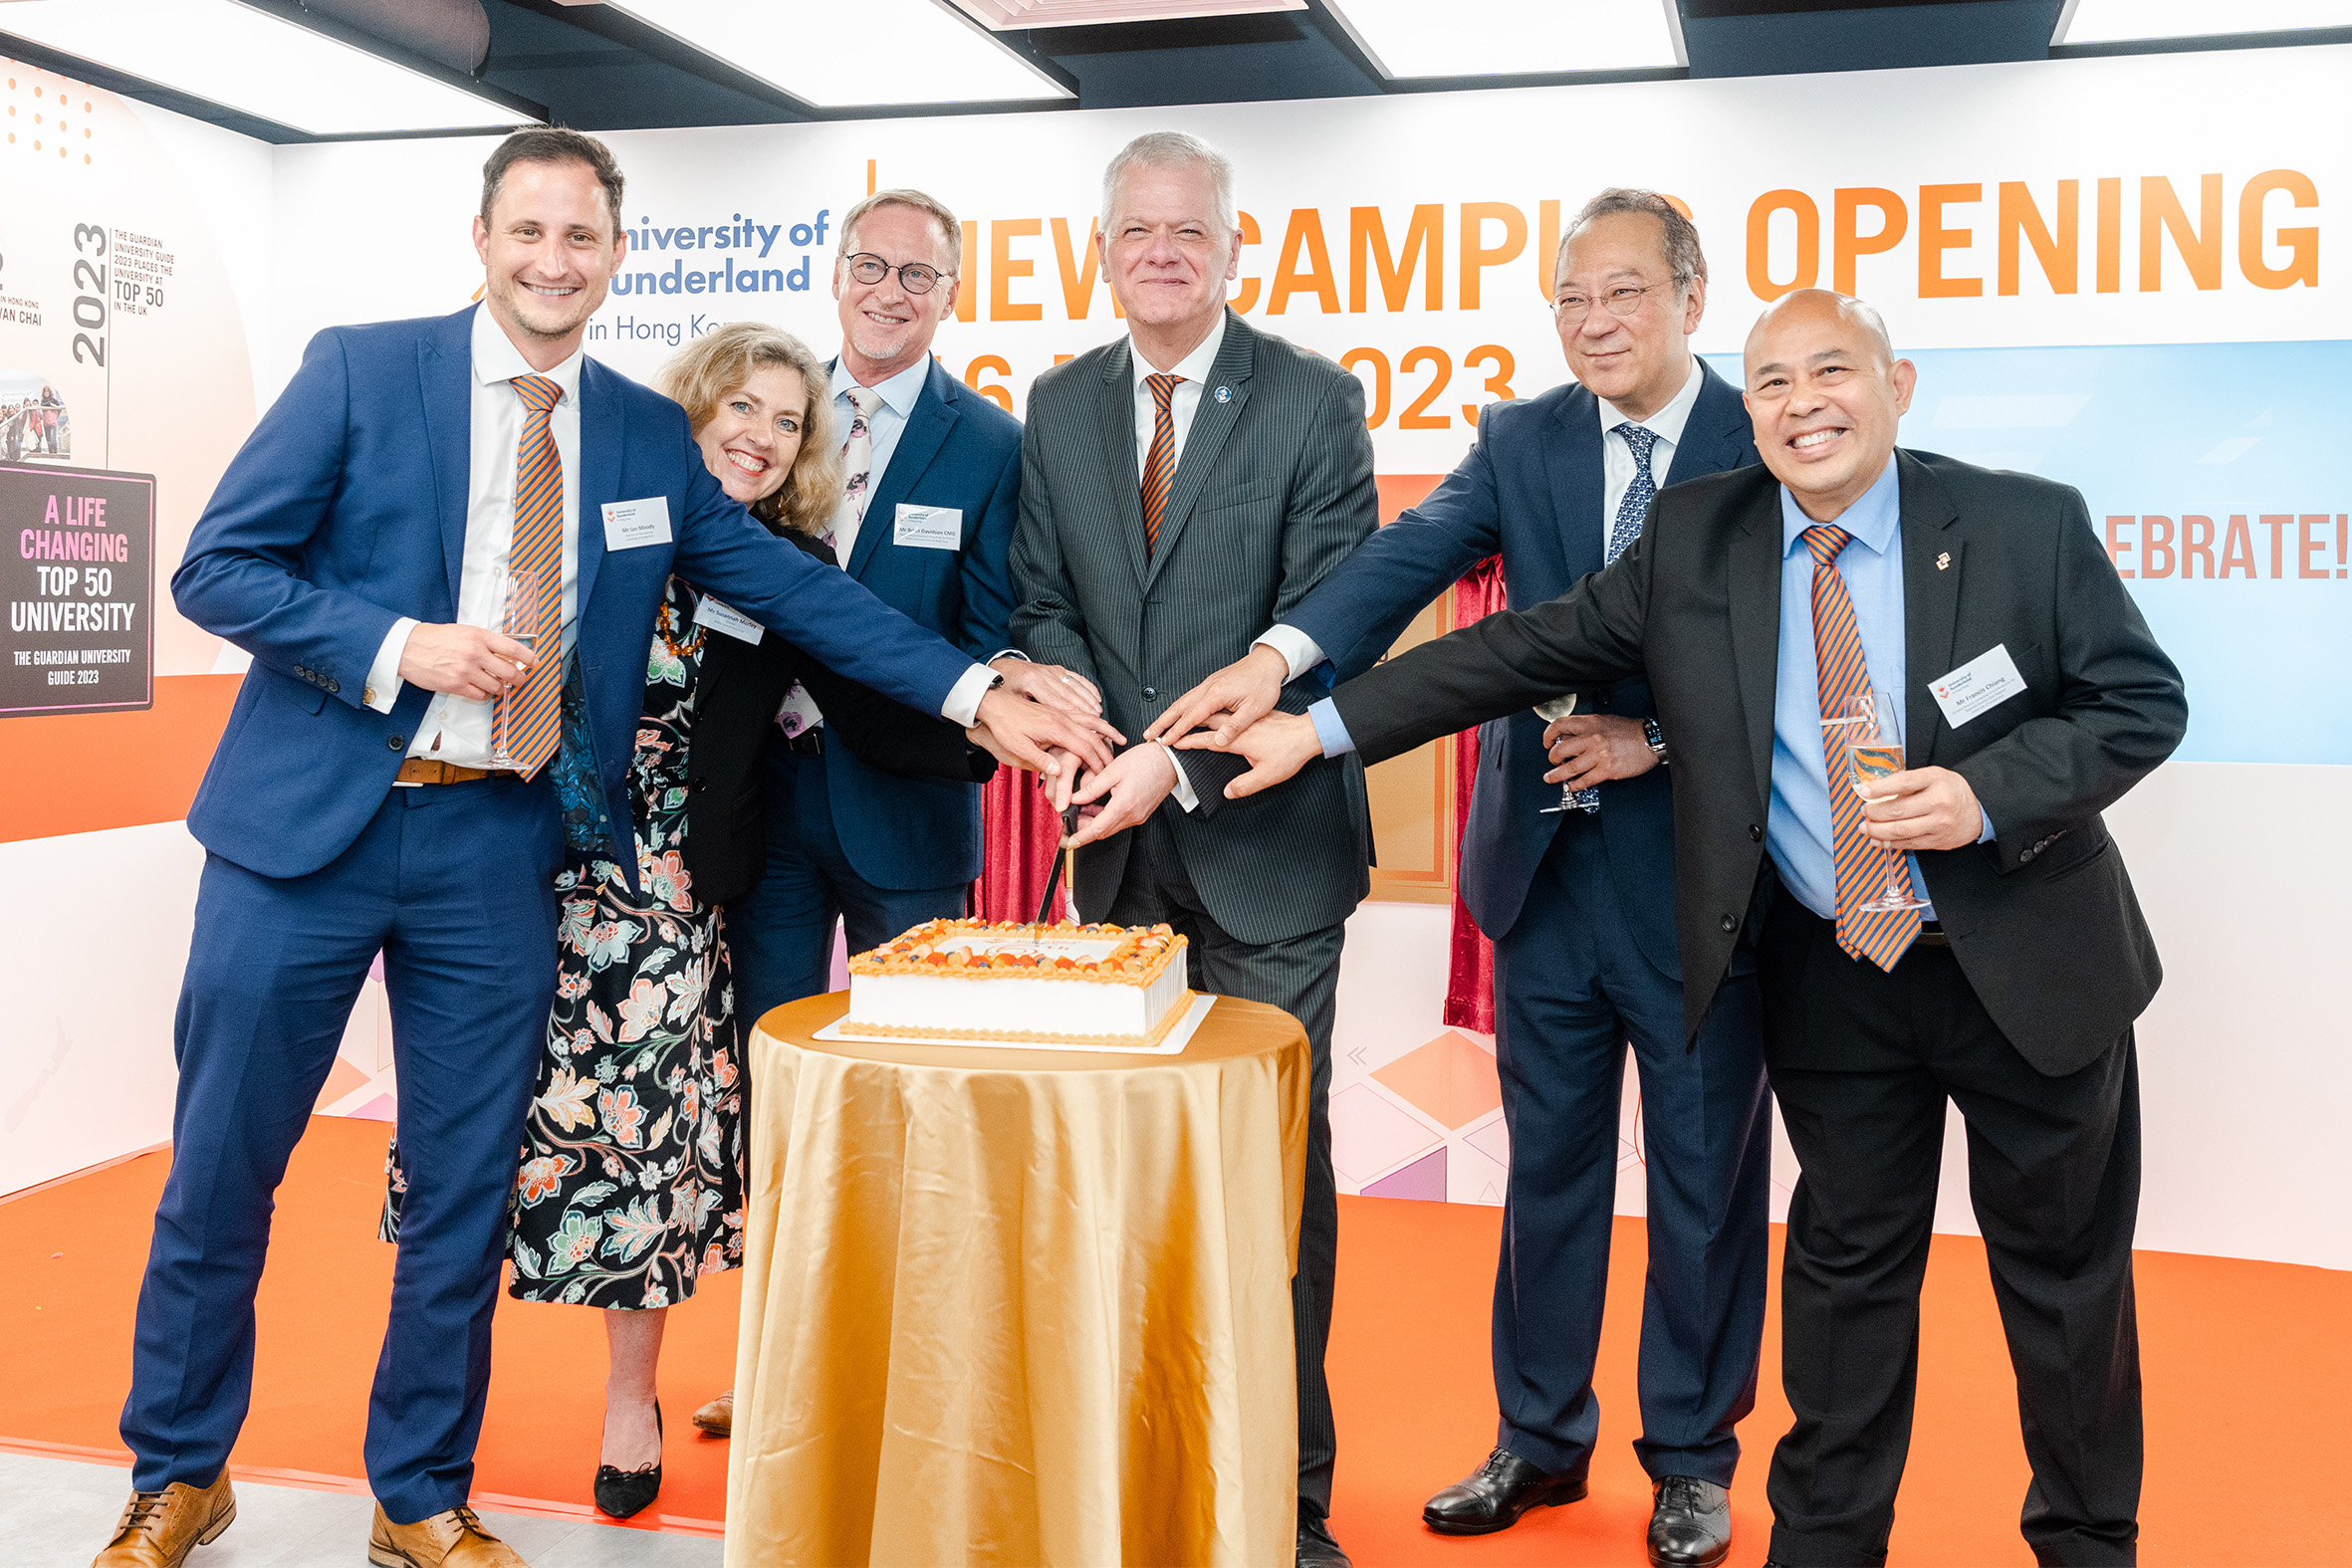 University of Sunderland staff and guests of honours were standing around a large cake to celebrate the 6th Anniversary of University of Sunderland in Hong Kong, during University of Sunderland in Hong Kong New Campus Opening 2023.